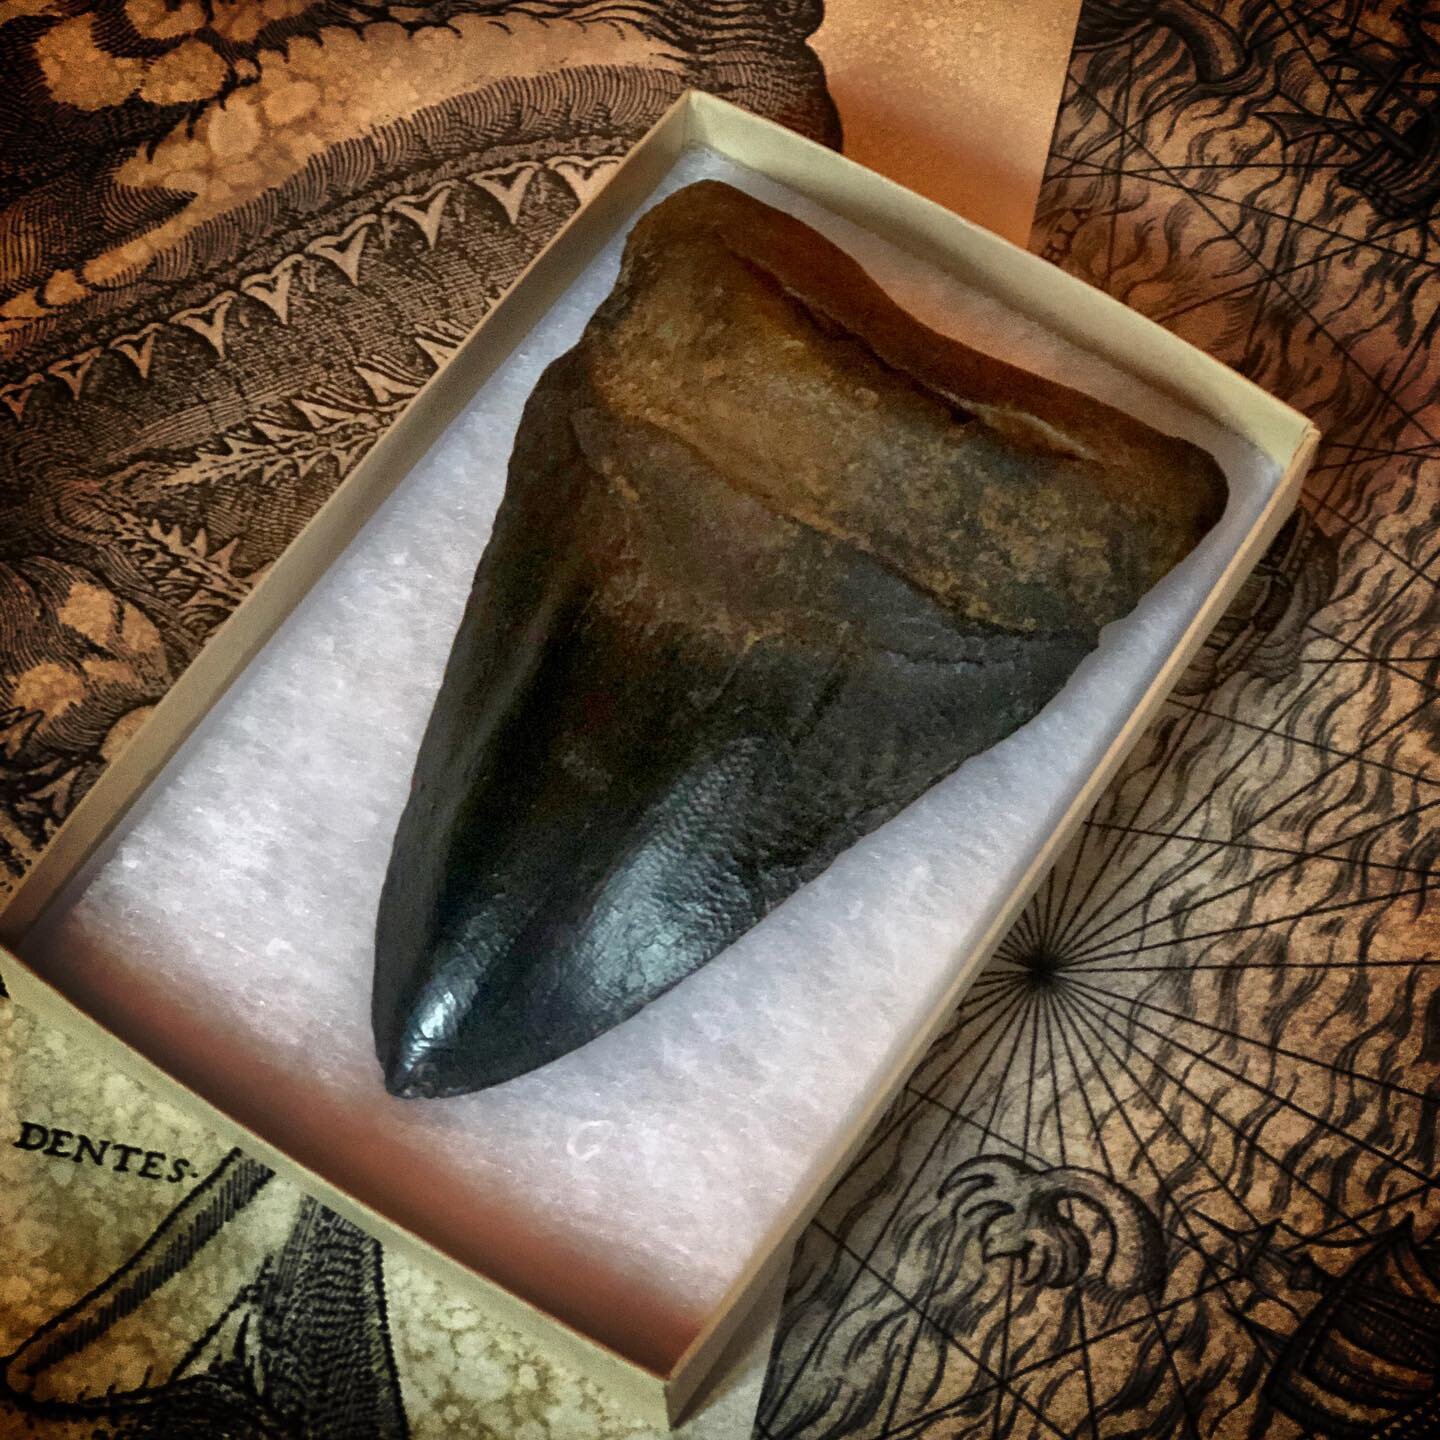 Replica Megalodon teeth cast in Herculite II and hand painted for a museum quality finish that has the weight and feel of a real fossil.

The moulds are taken from original teeth in our collection.

Each replica tooth is presented in a gift box and c